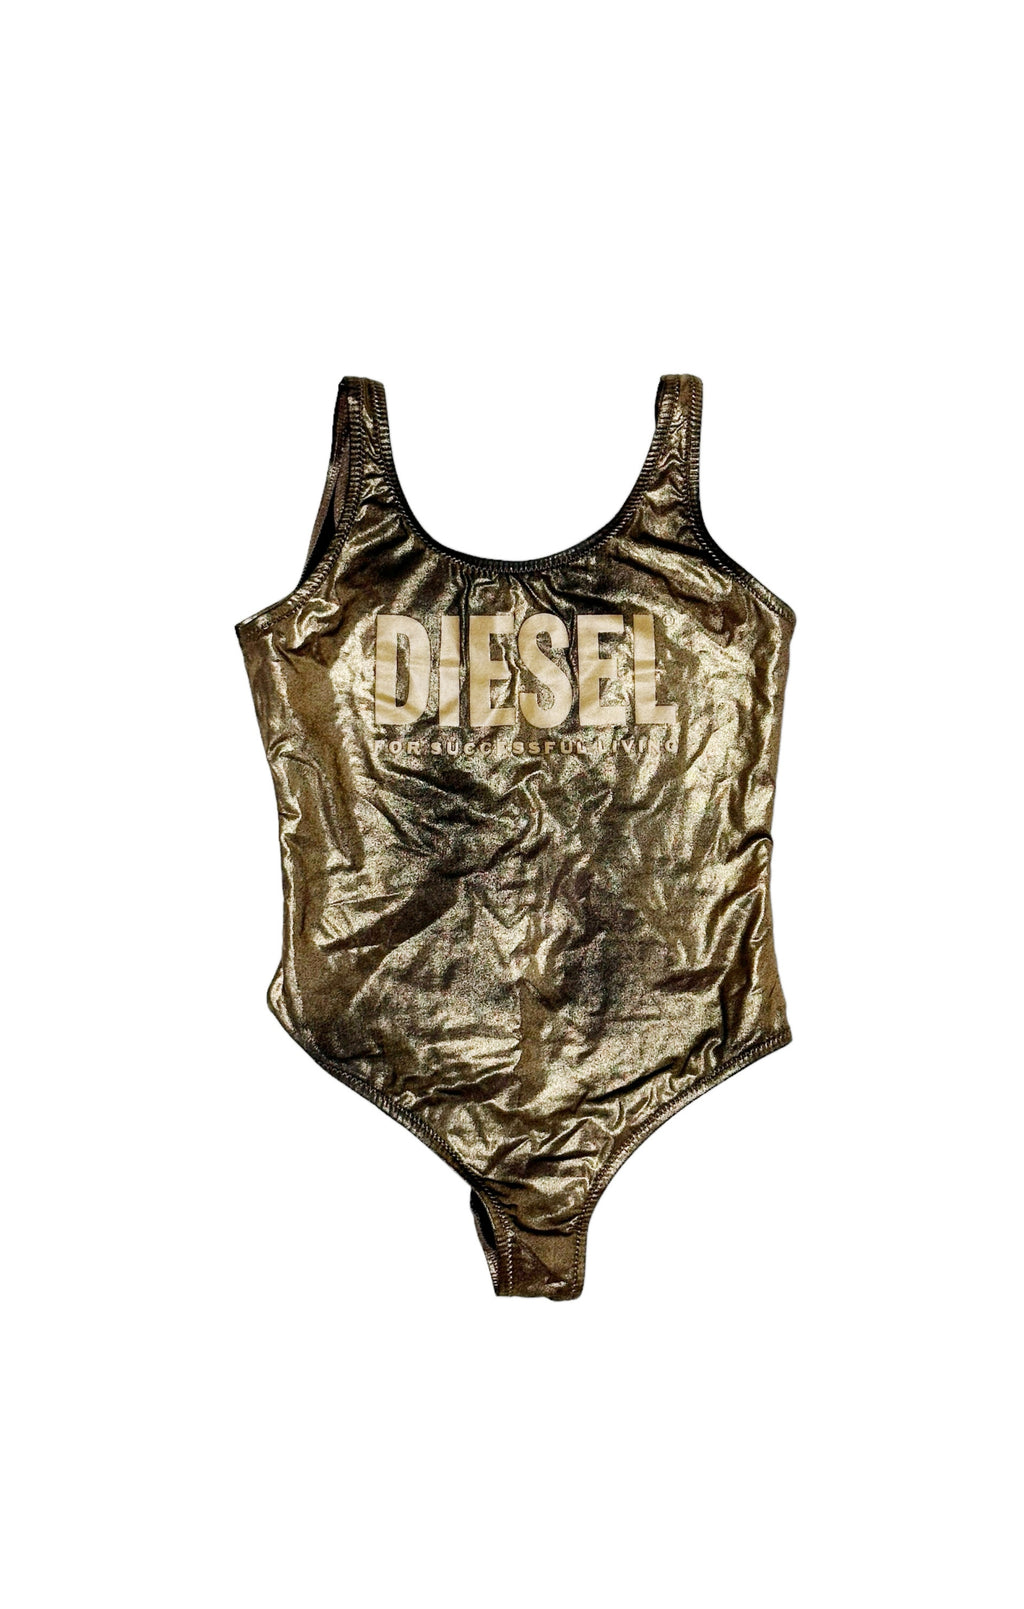 DIESEL Swimsuit Size: No size tags, fits like 4 Years